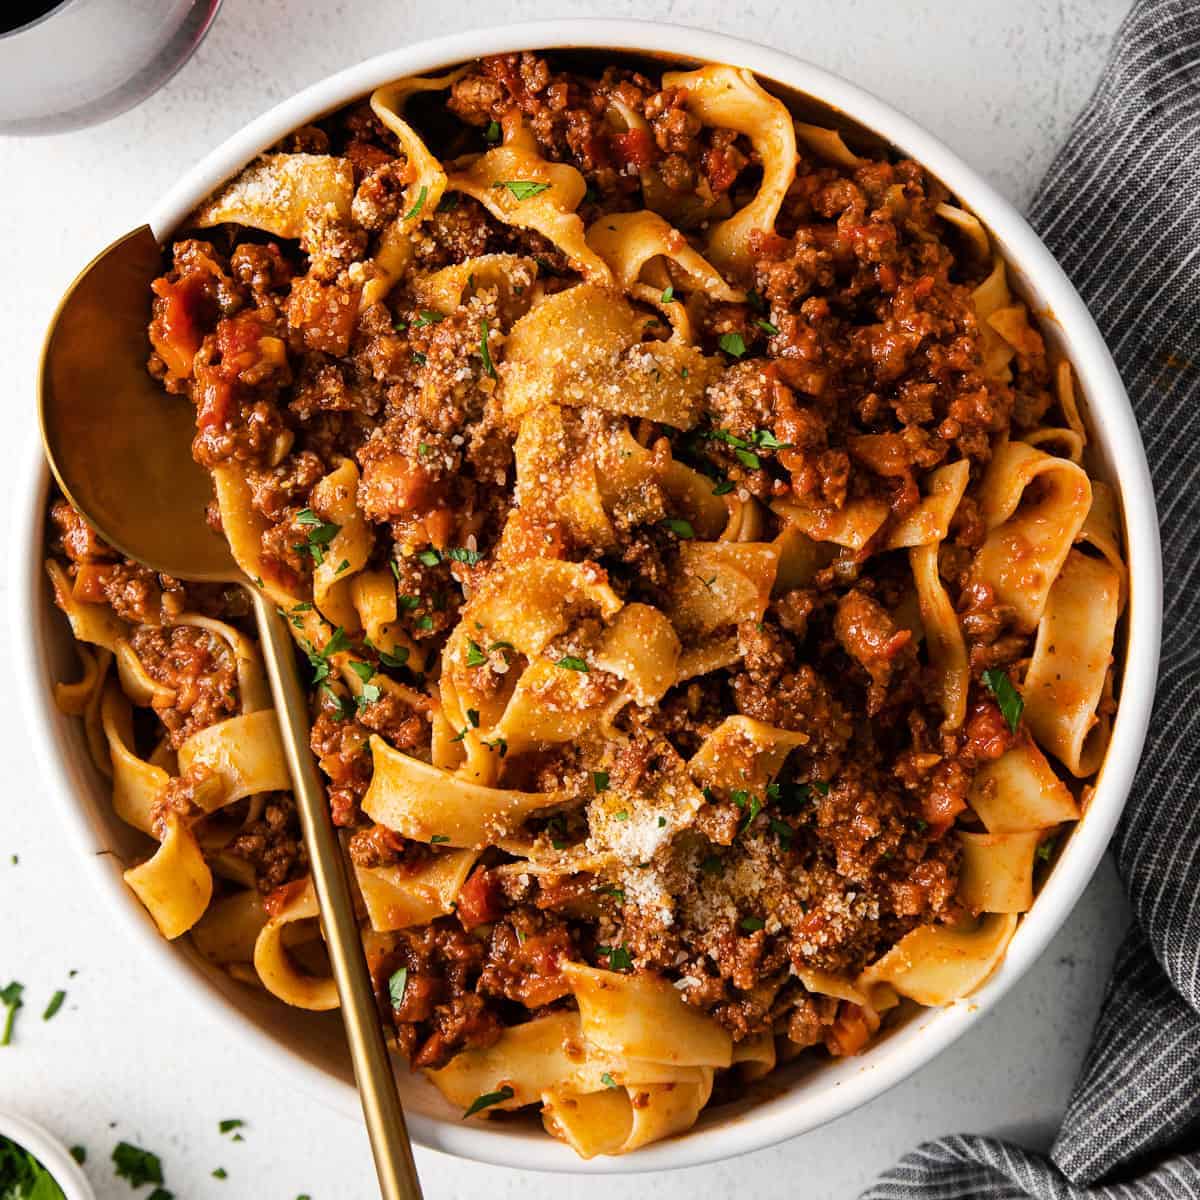 https://fitfoodiefinds.com/wp-content/uploads/2022/01/Slow-Cooker-Bolognese-06-1.jpg